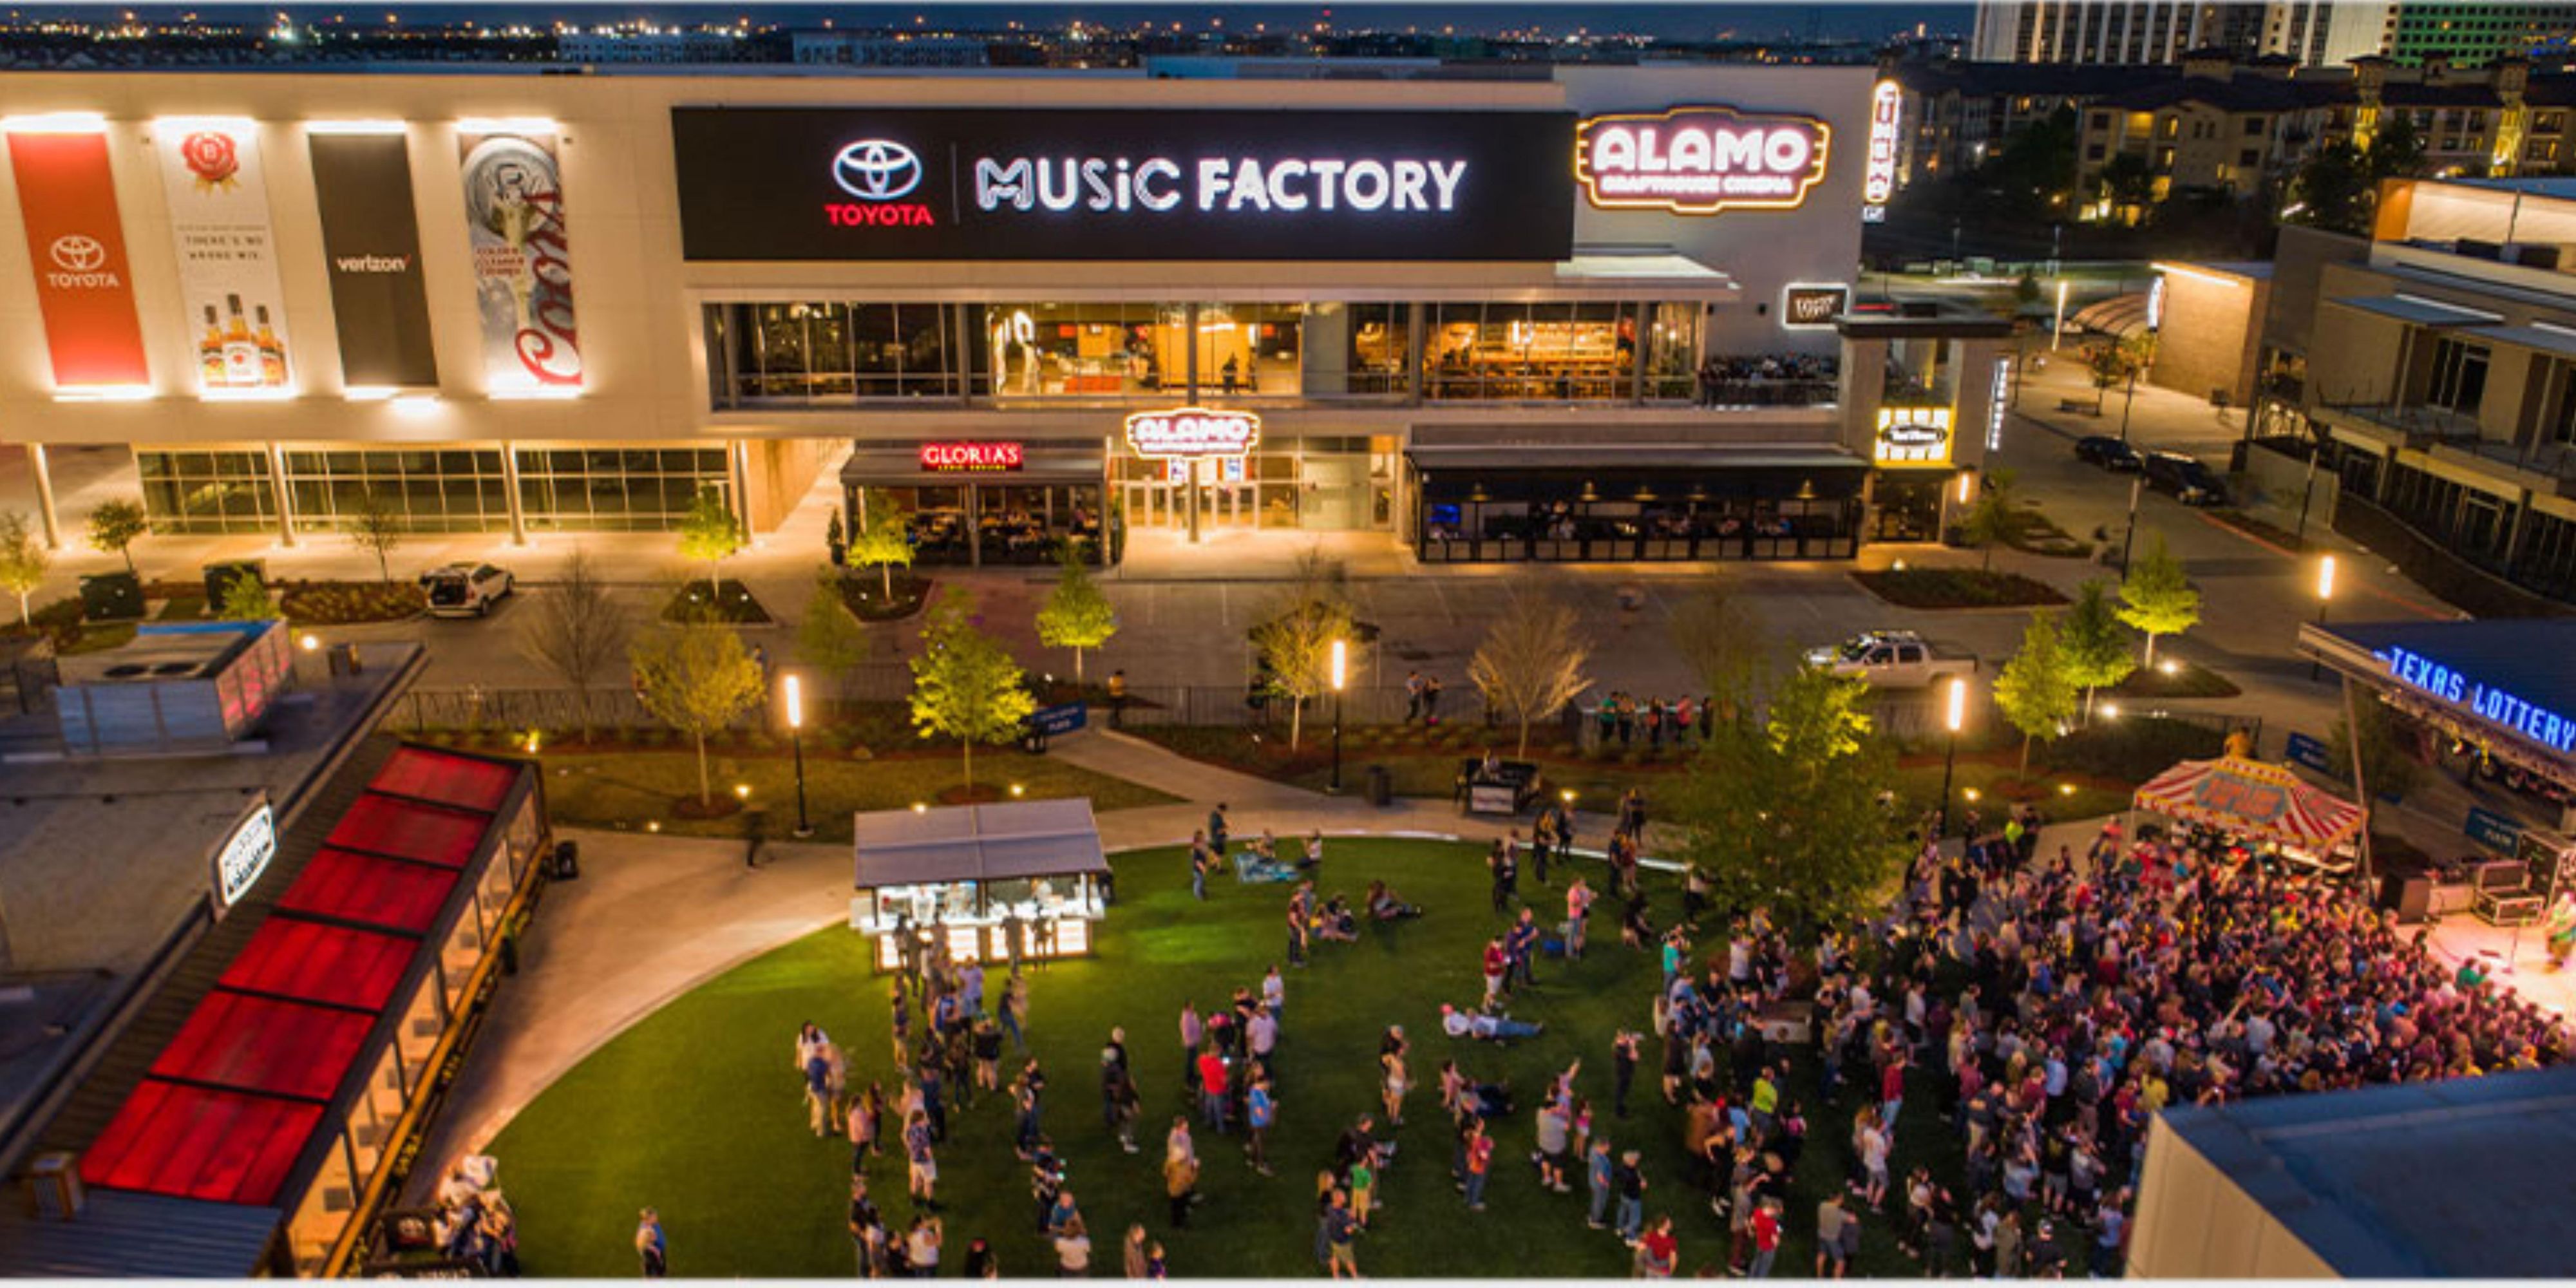 Be sure to see great live concerts, grab a bite to eat or catch the latest movies in theater at The Toyota Music Factory, and then unwind with us!